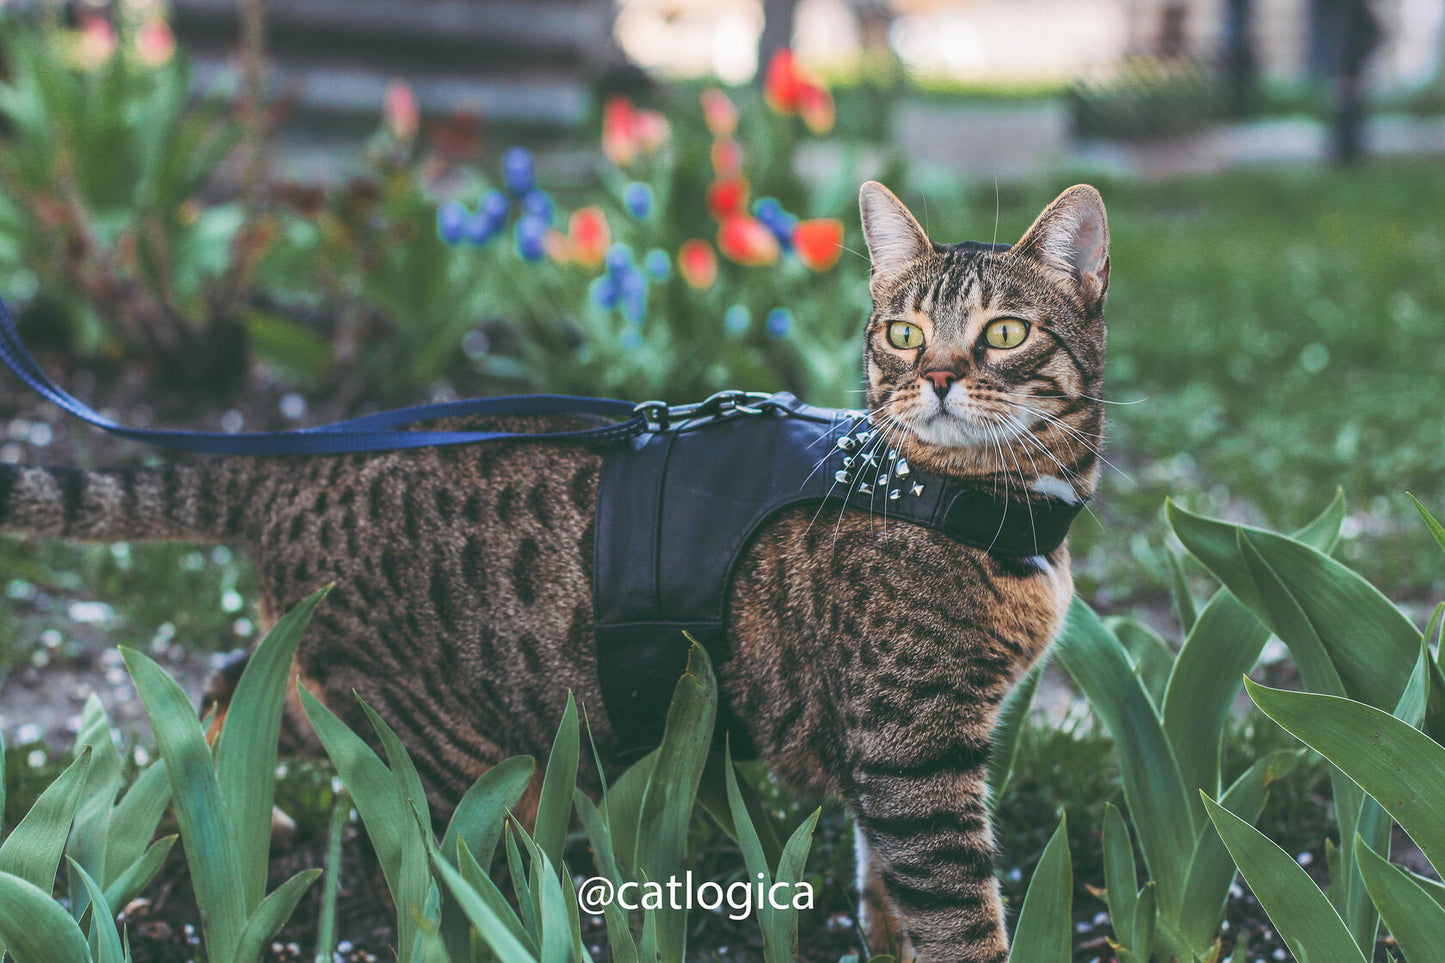 Difficult to escape upcycling leather cat harness